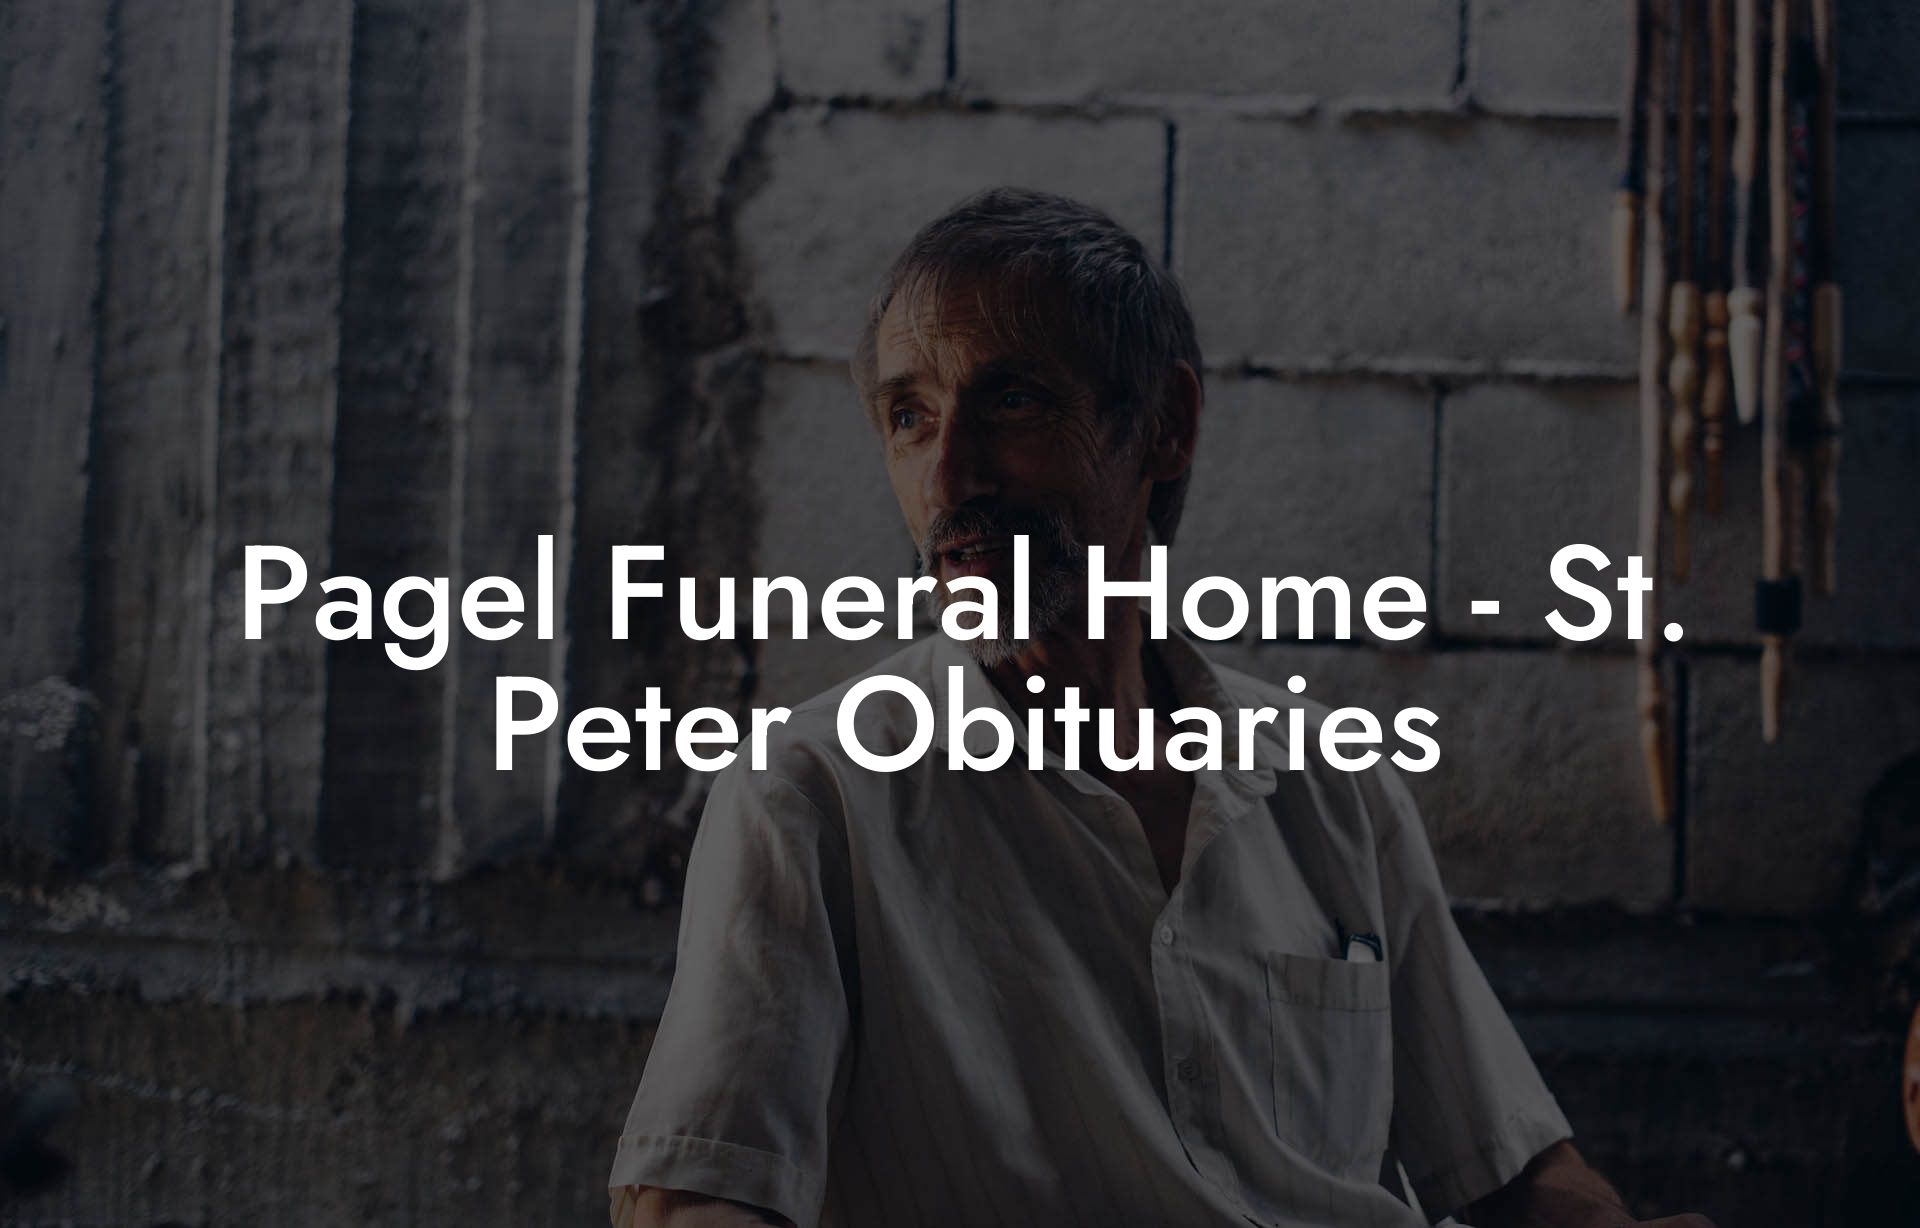 Pagel Funeral Home - St. Peter Obituaries